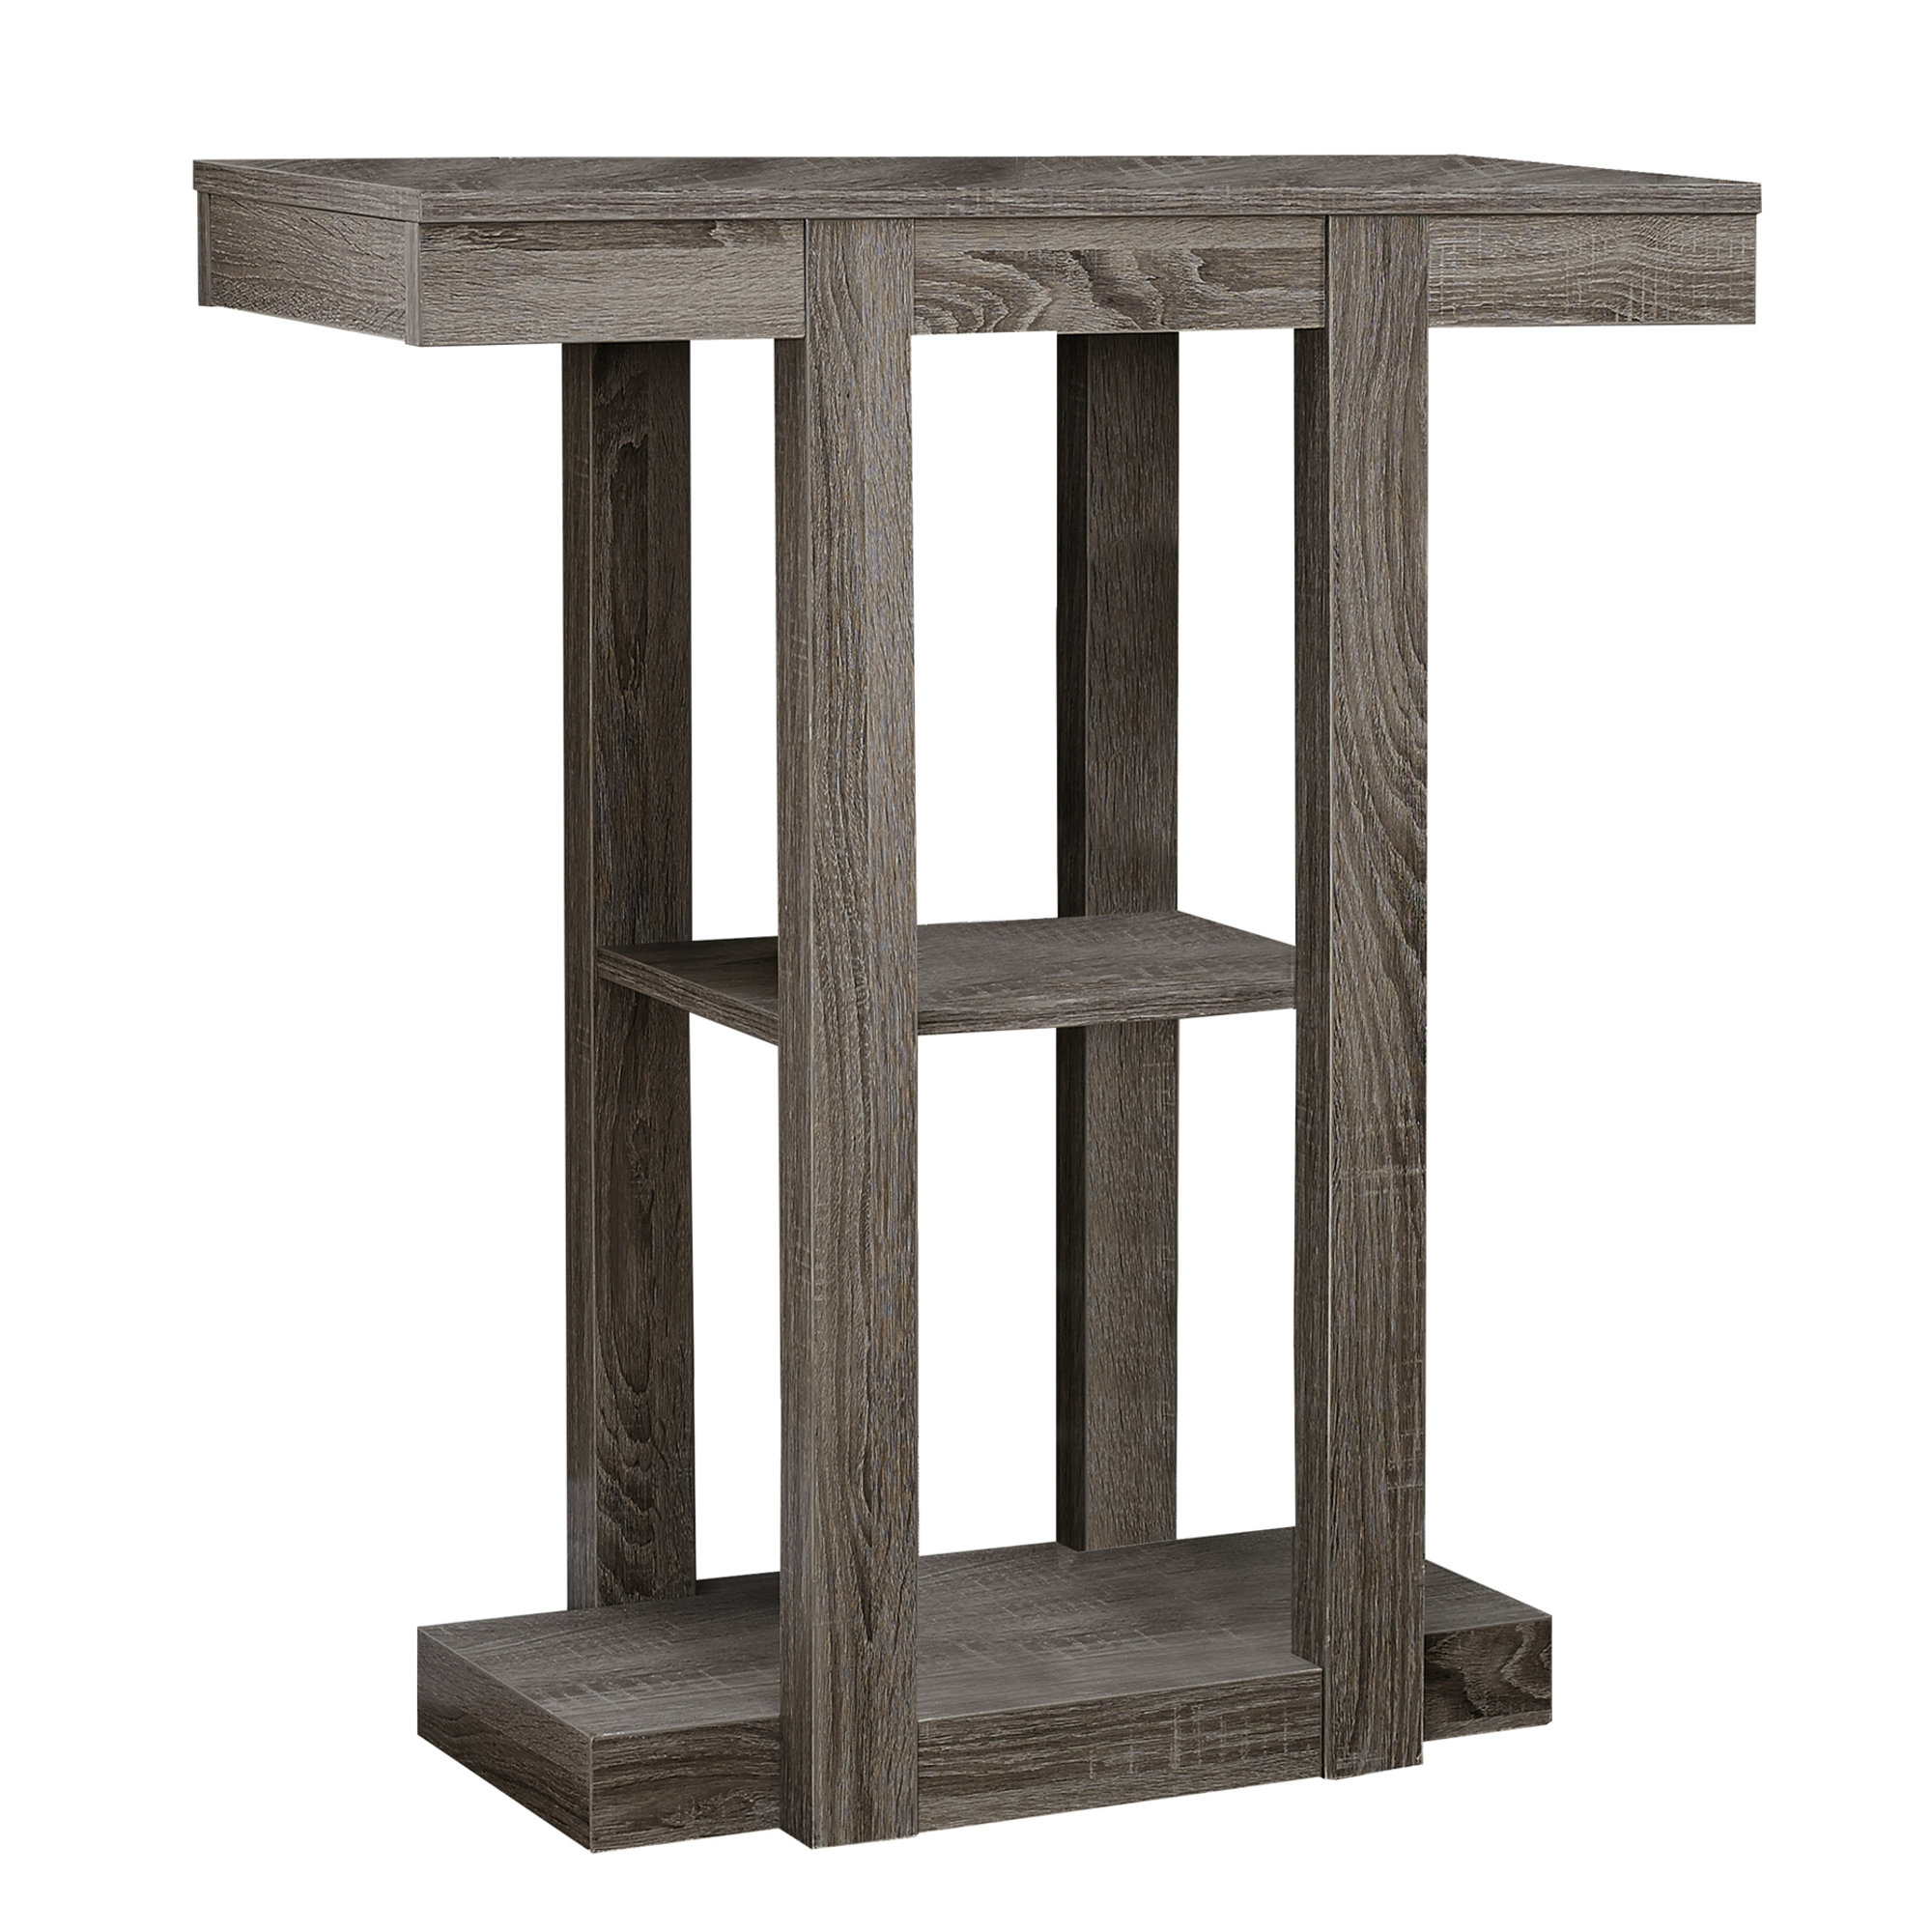 12" x 31.5" x 34" Dark Taupe Finish Hollow Core Accent Table